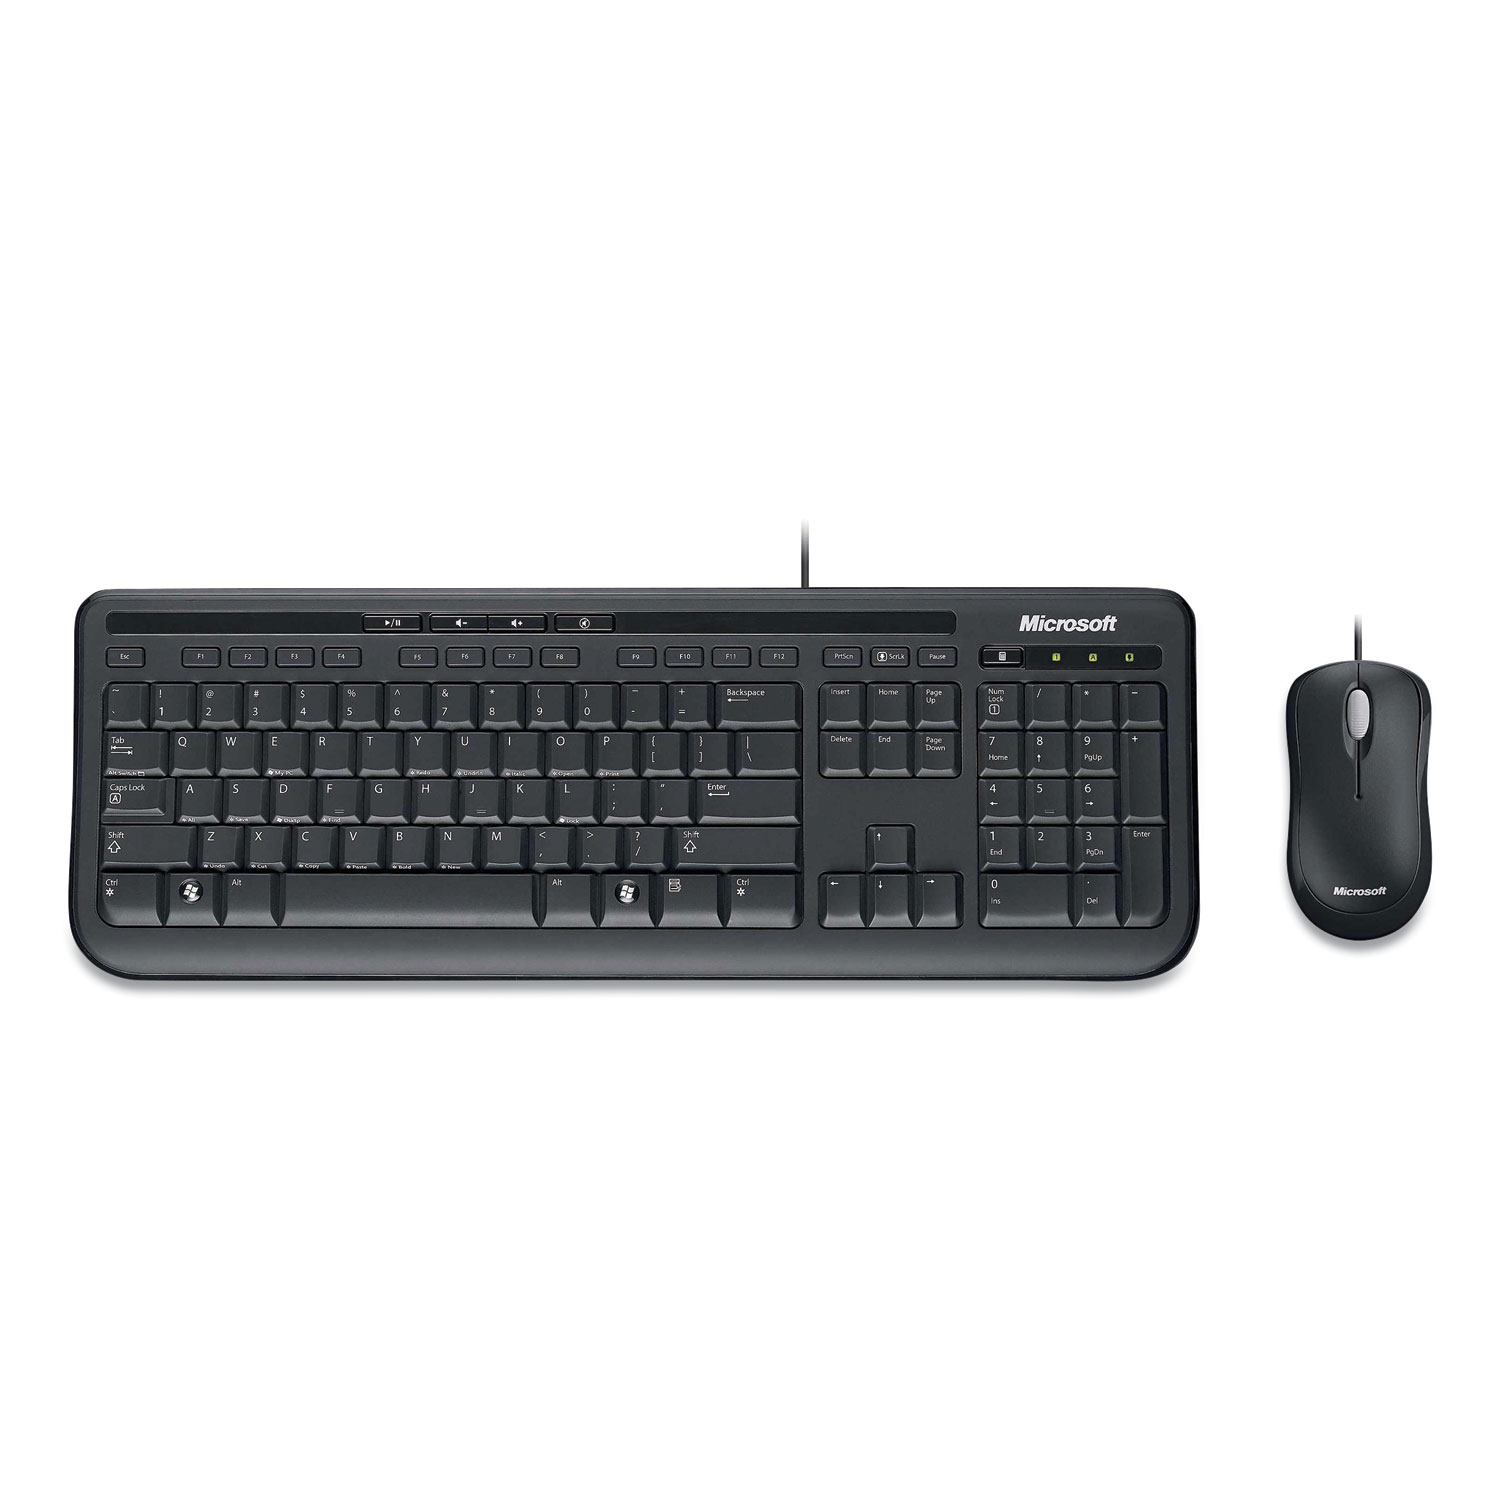  Microsoft APB-00001 Desktop 600 Wired Keyboard and Mouse Combo, Black (MSF785489) 